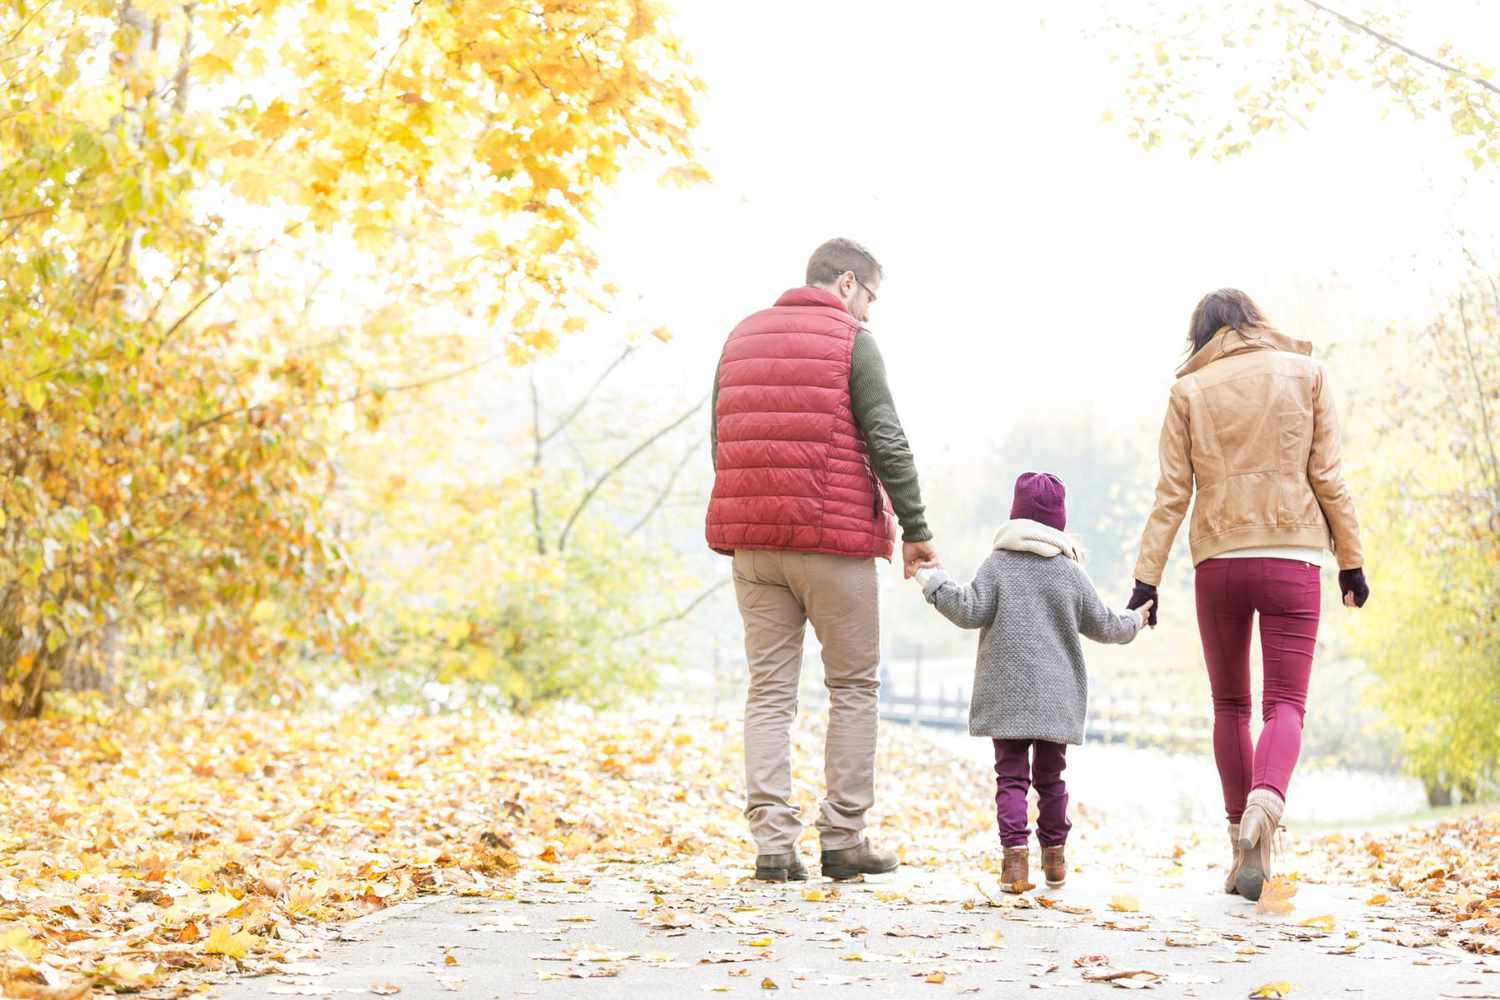 6 Mindfulness Activities You Can Do as a Family